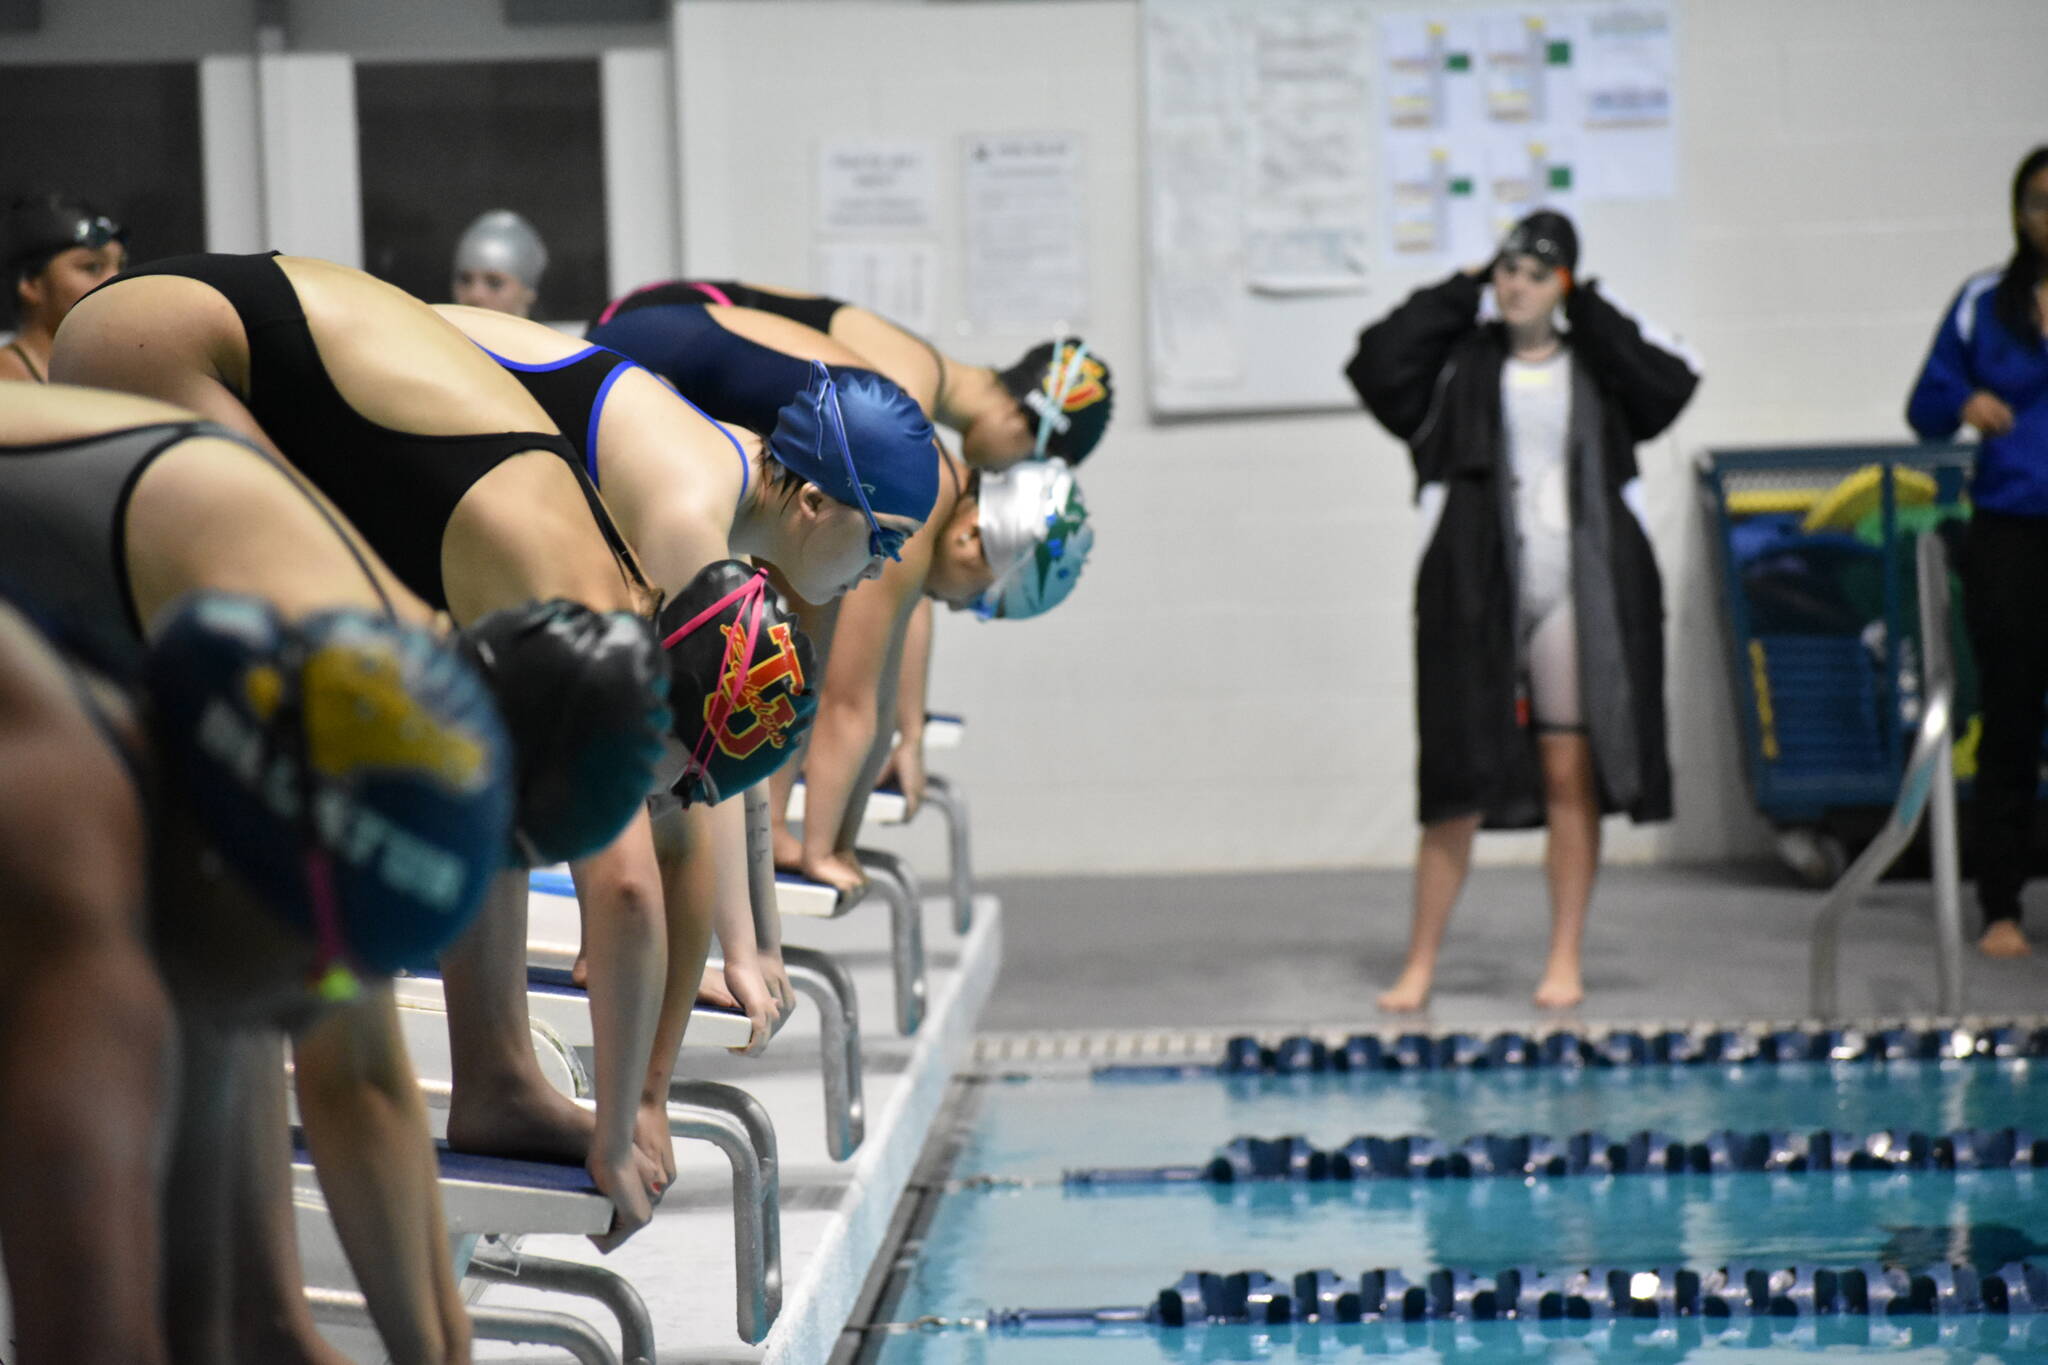 Photo by Ben Ray/Sound Publishing
Swimmers line up for the 400 Yard Freestyle Relay at the All City Meet inside the King County Aquatic Center.